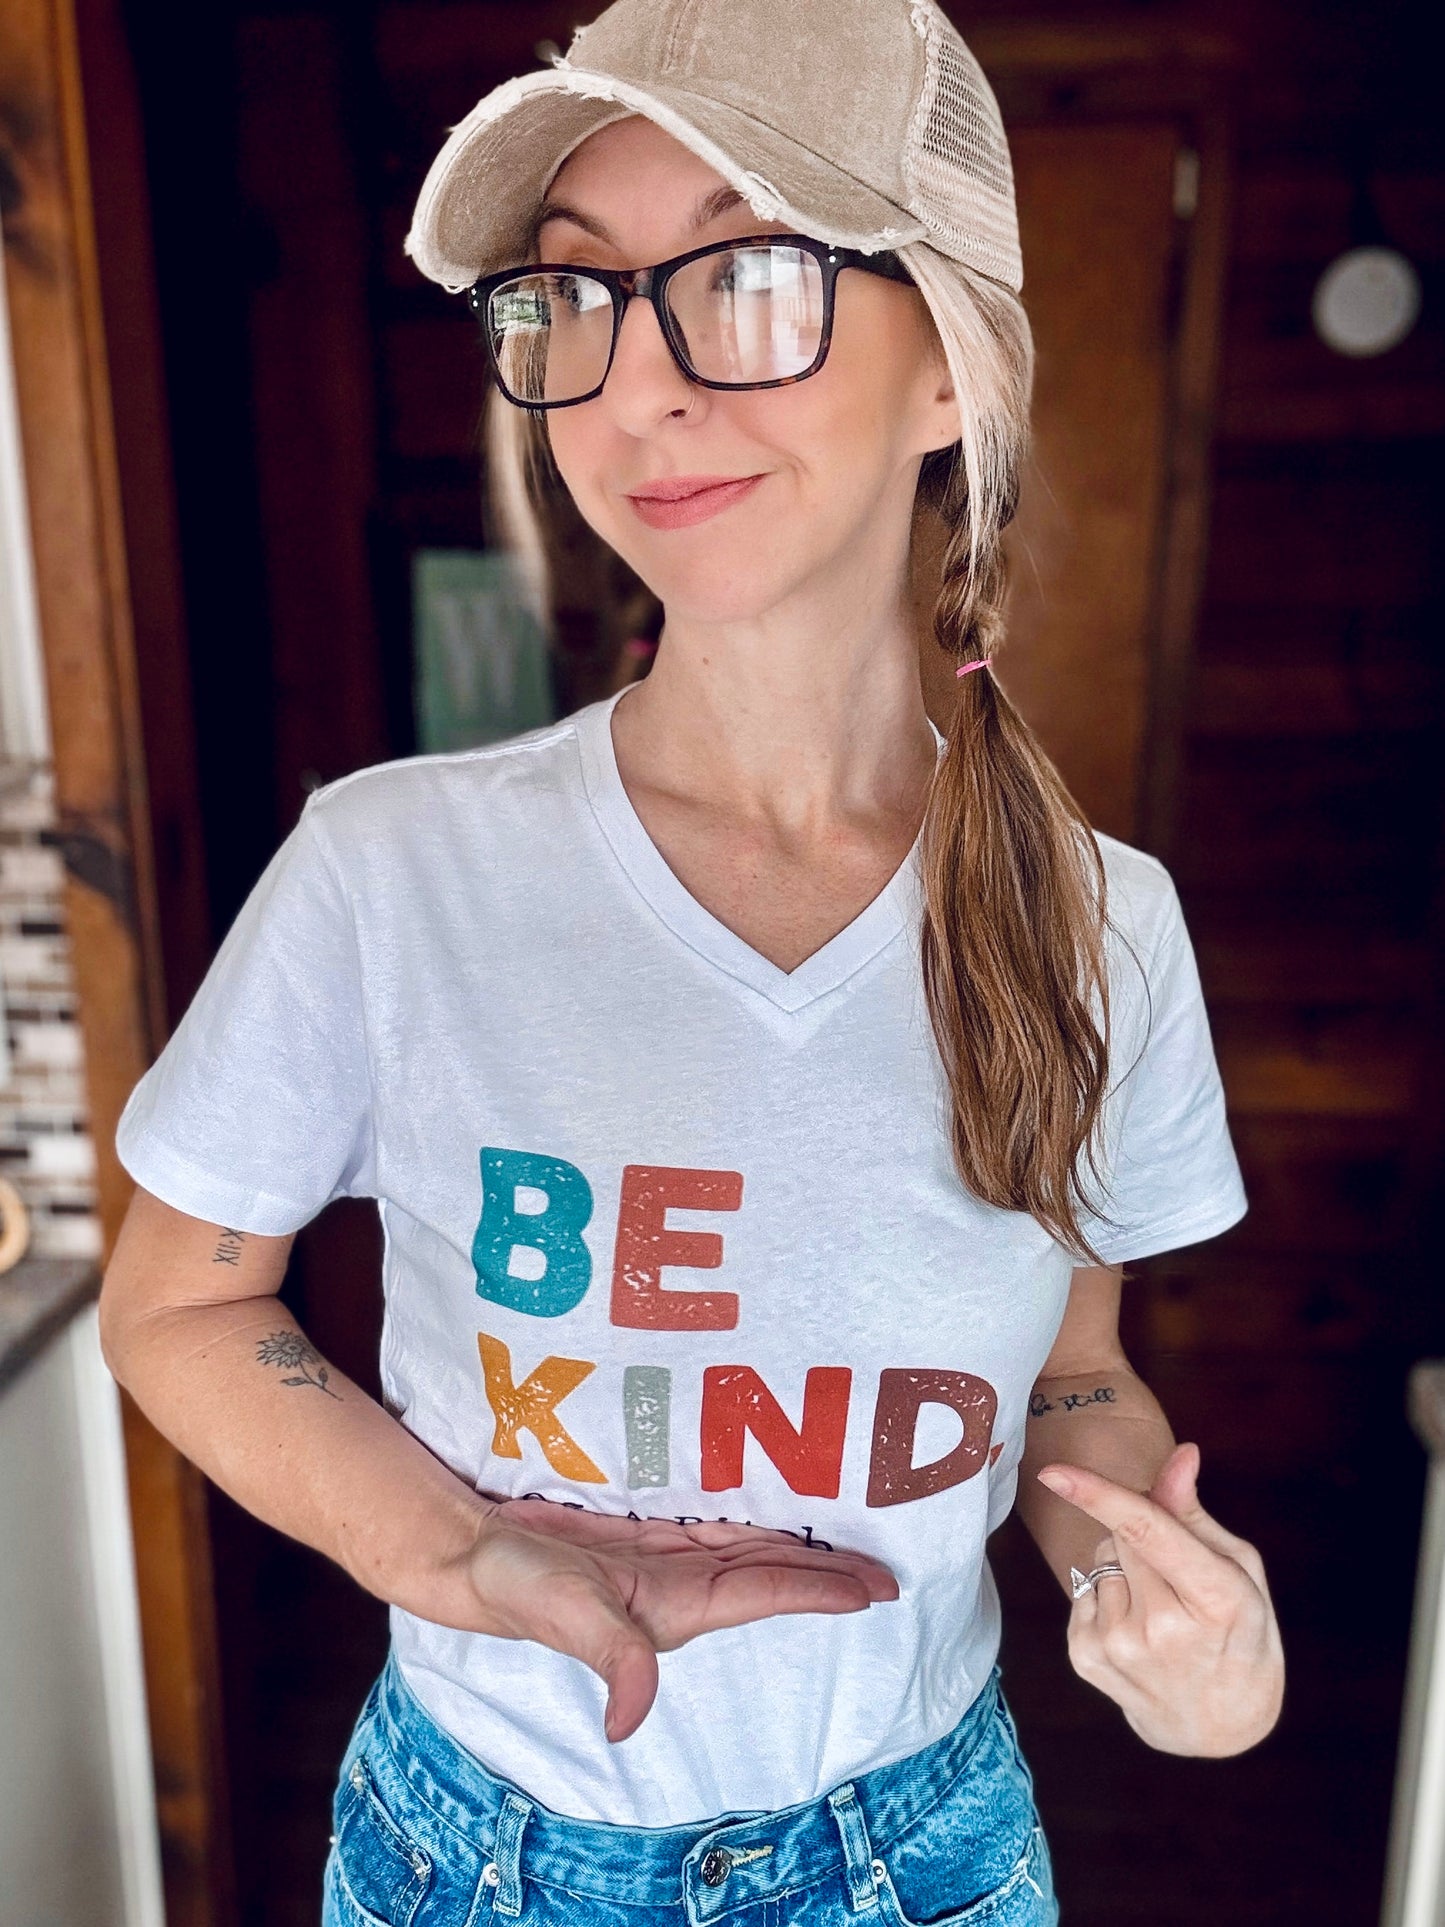 ‘Be Kind…Of A Bitch’ Graphic Tee